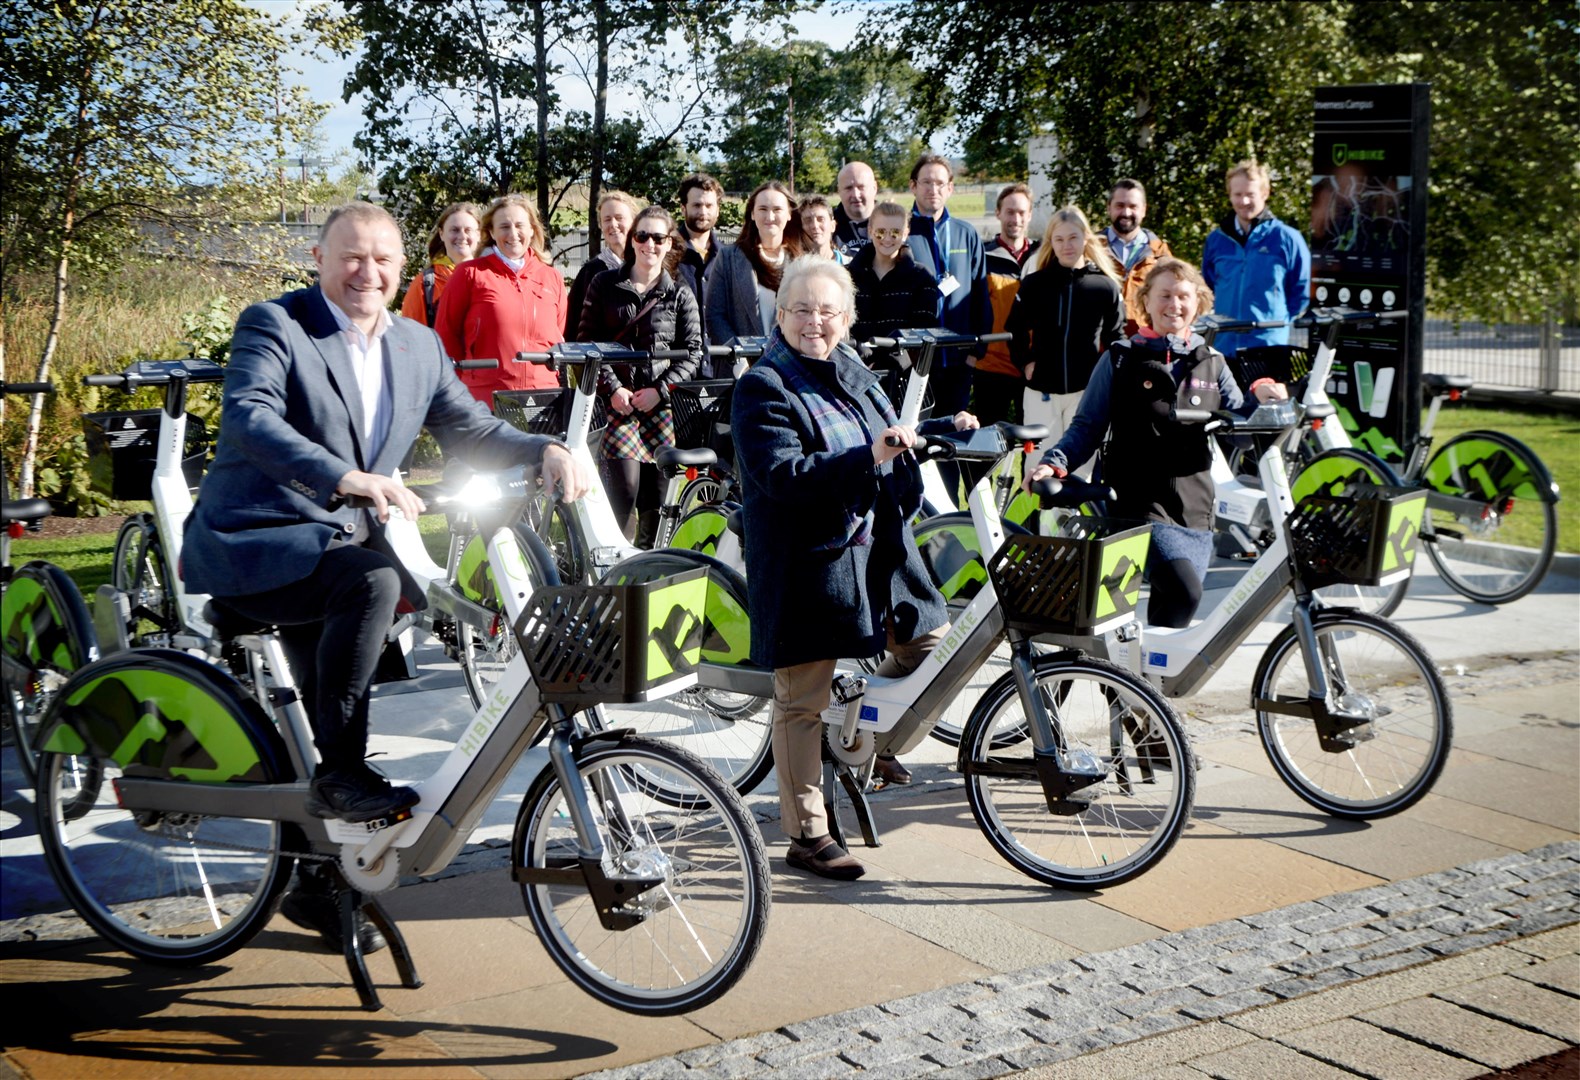 HI-BIKE launches at the University of the Highlands and Islands Campus: Drew Hendry, MP, Cllr Trish Robertson and Vikki Trelfer, Hi-Trans Active Travel Officer with supporters behind. Picture: James Mackenzie.